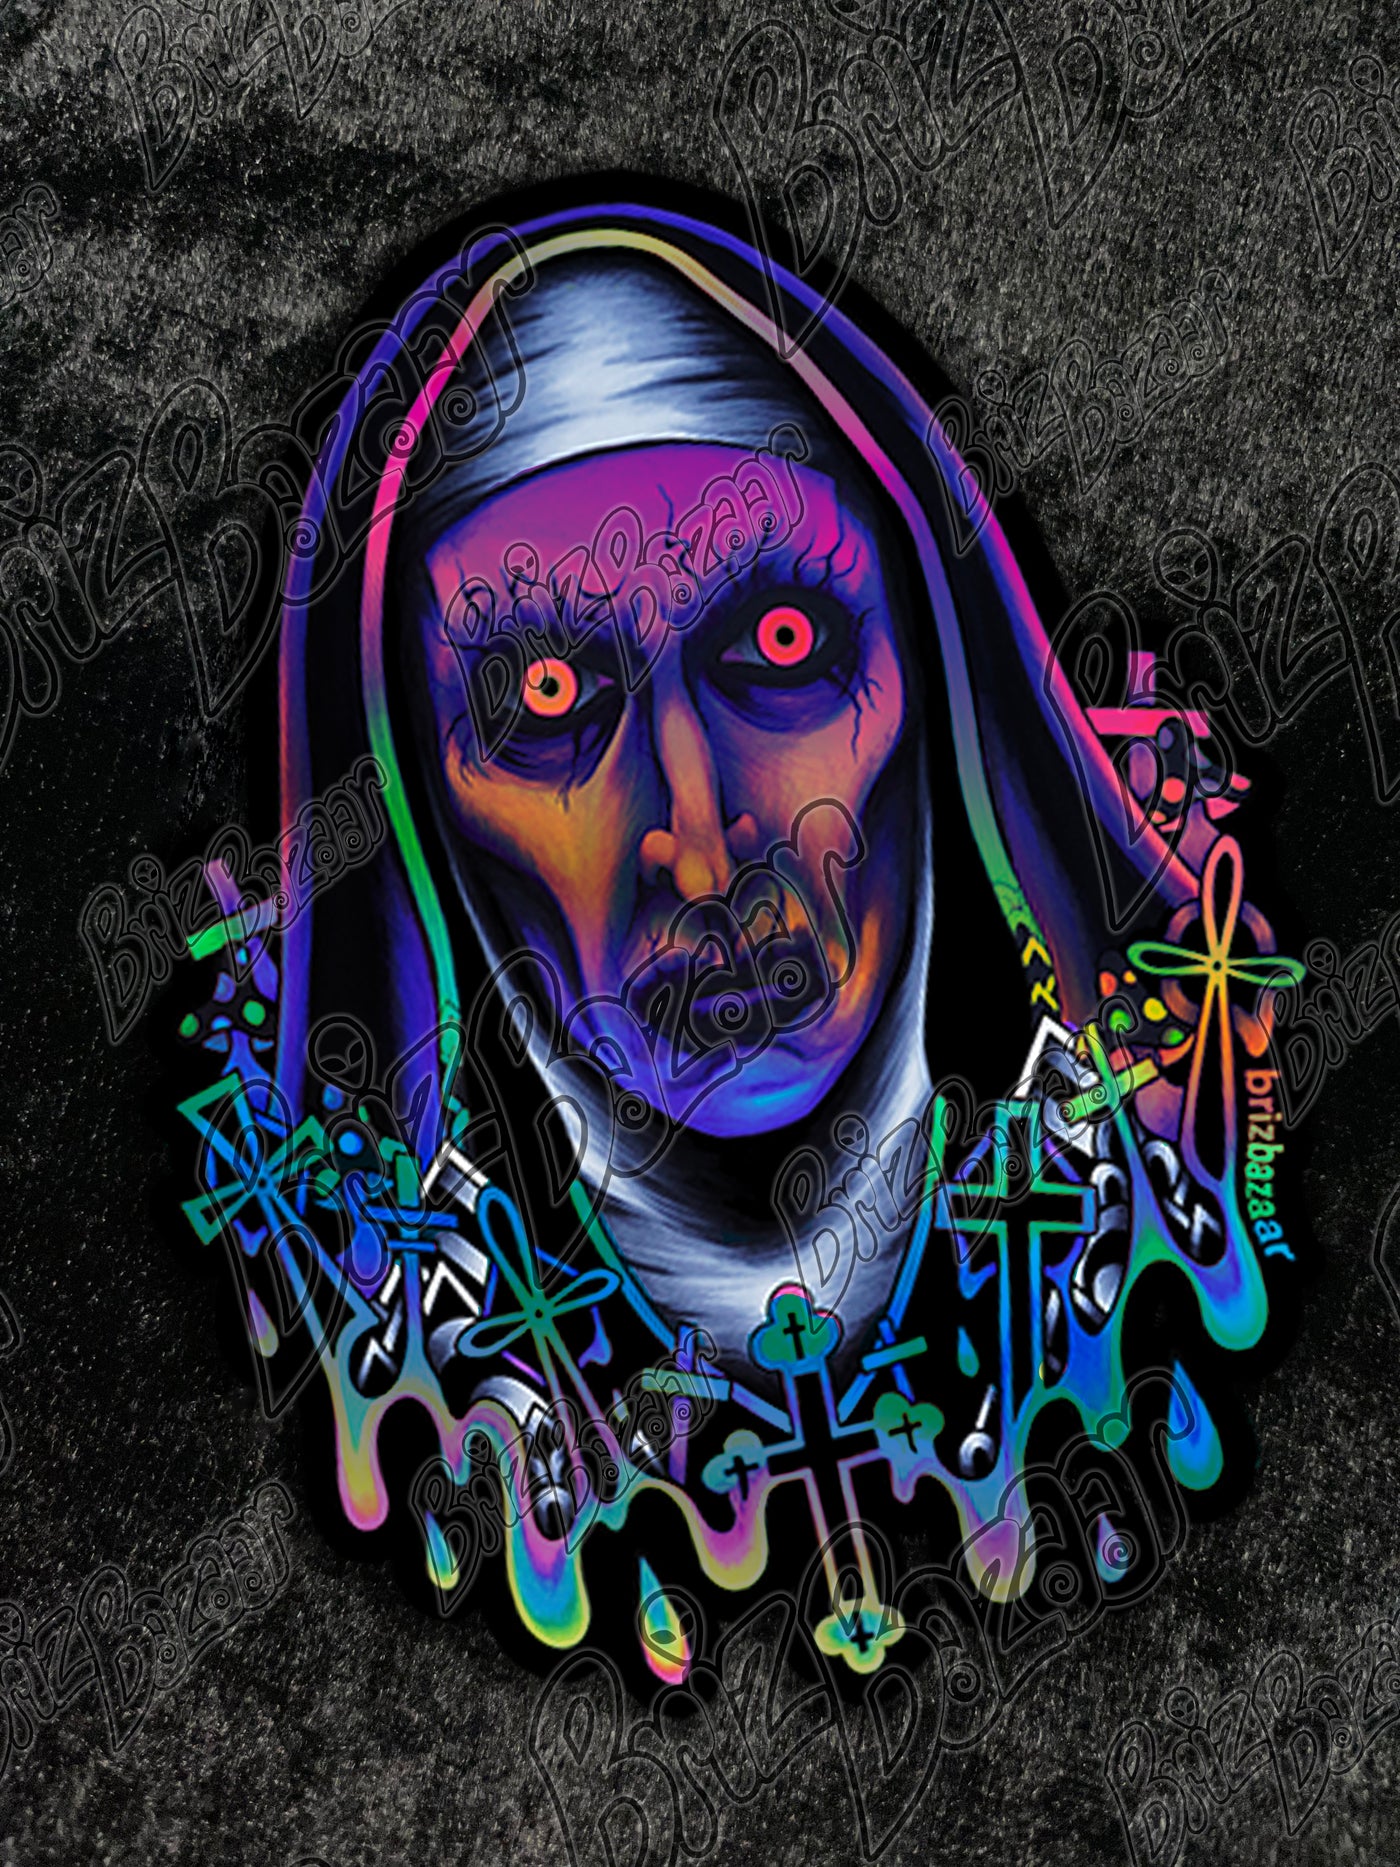 Holographic sticker of Twizted Sister